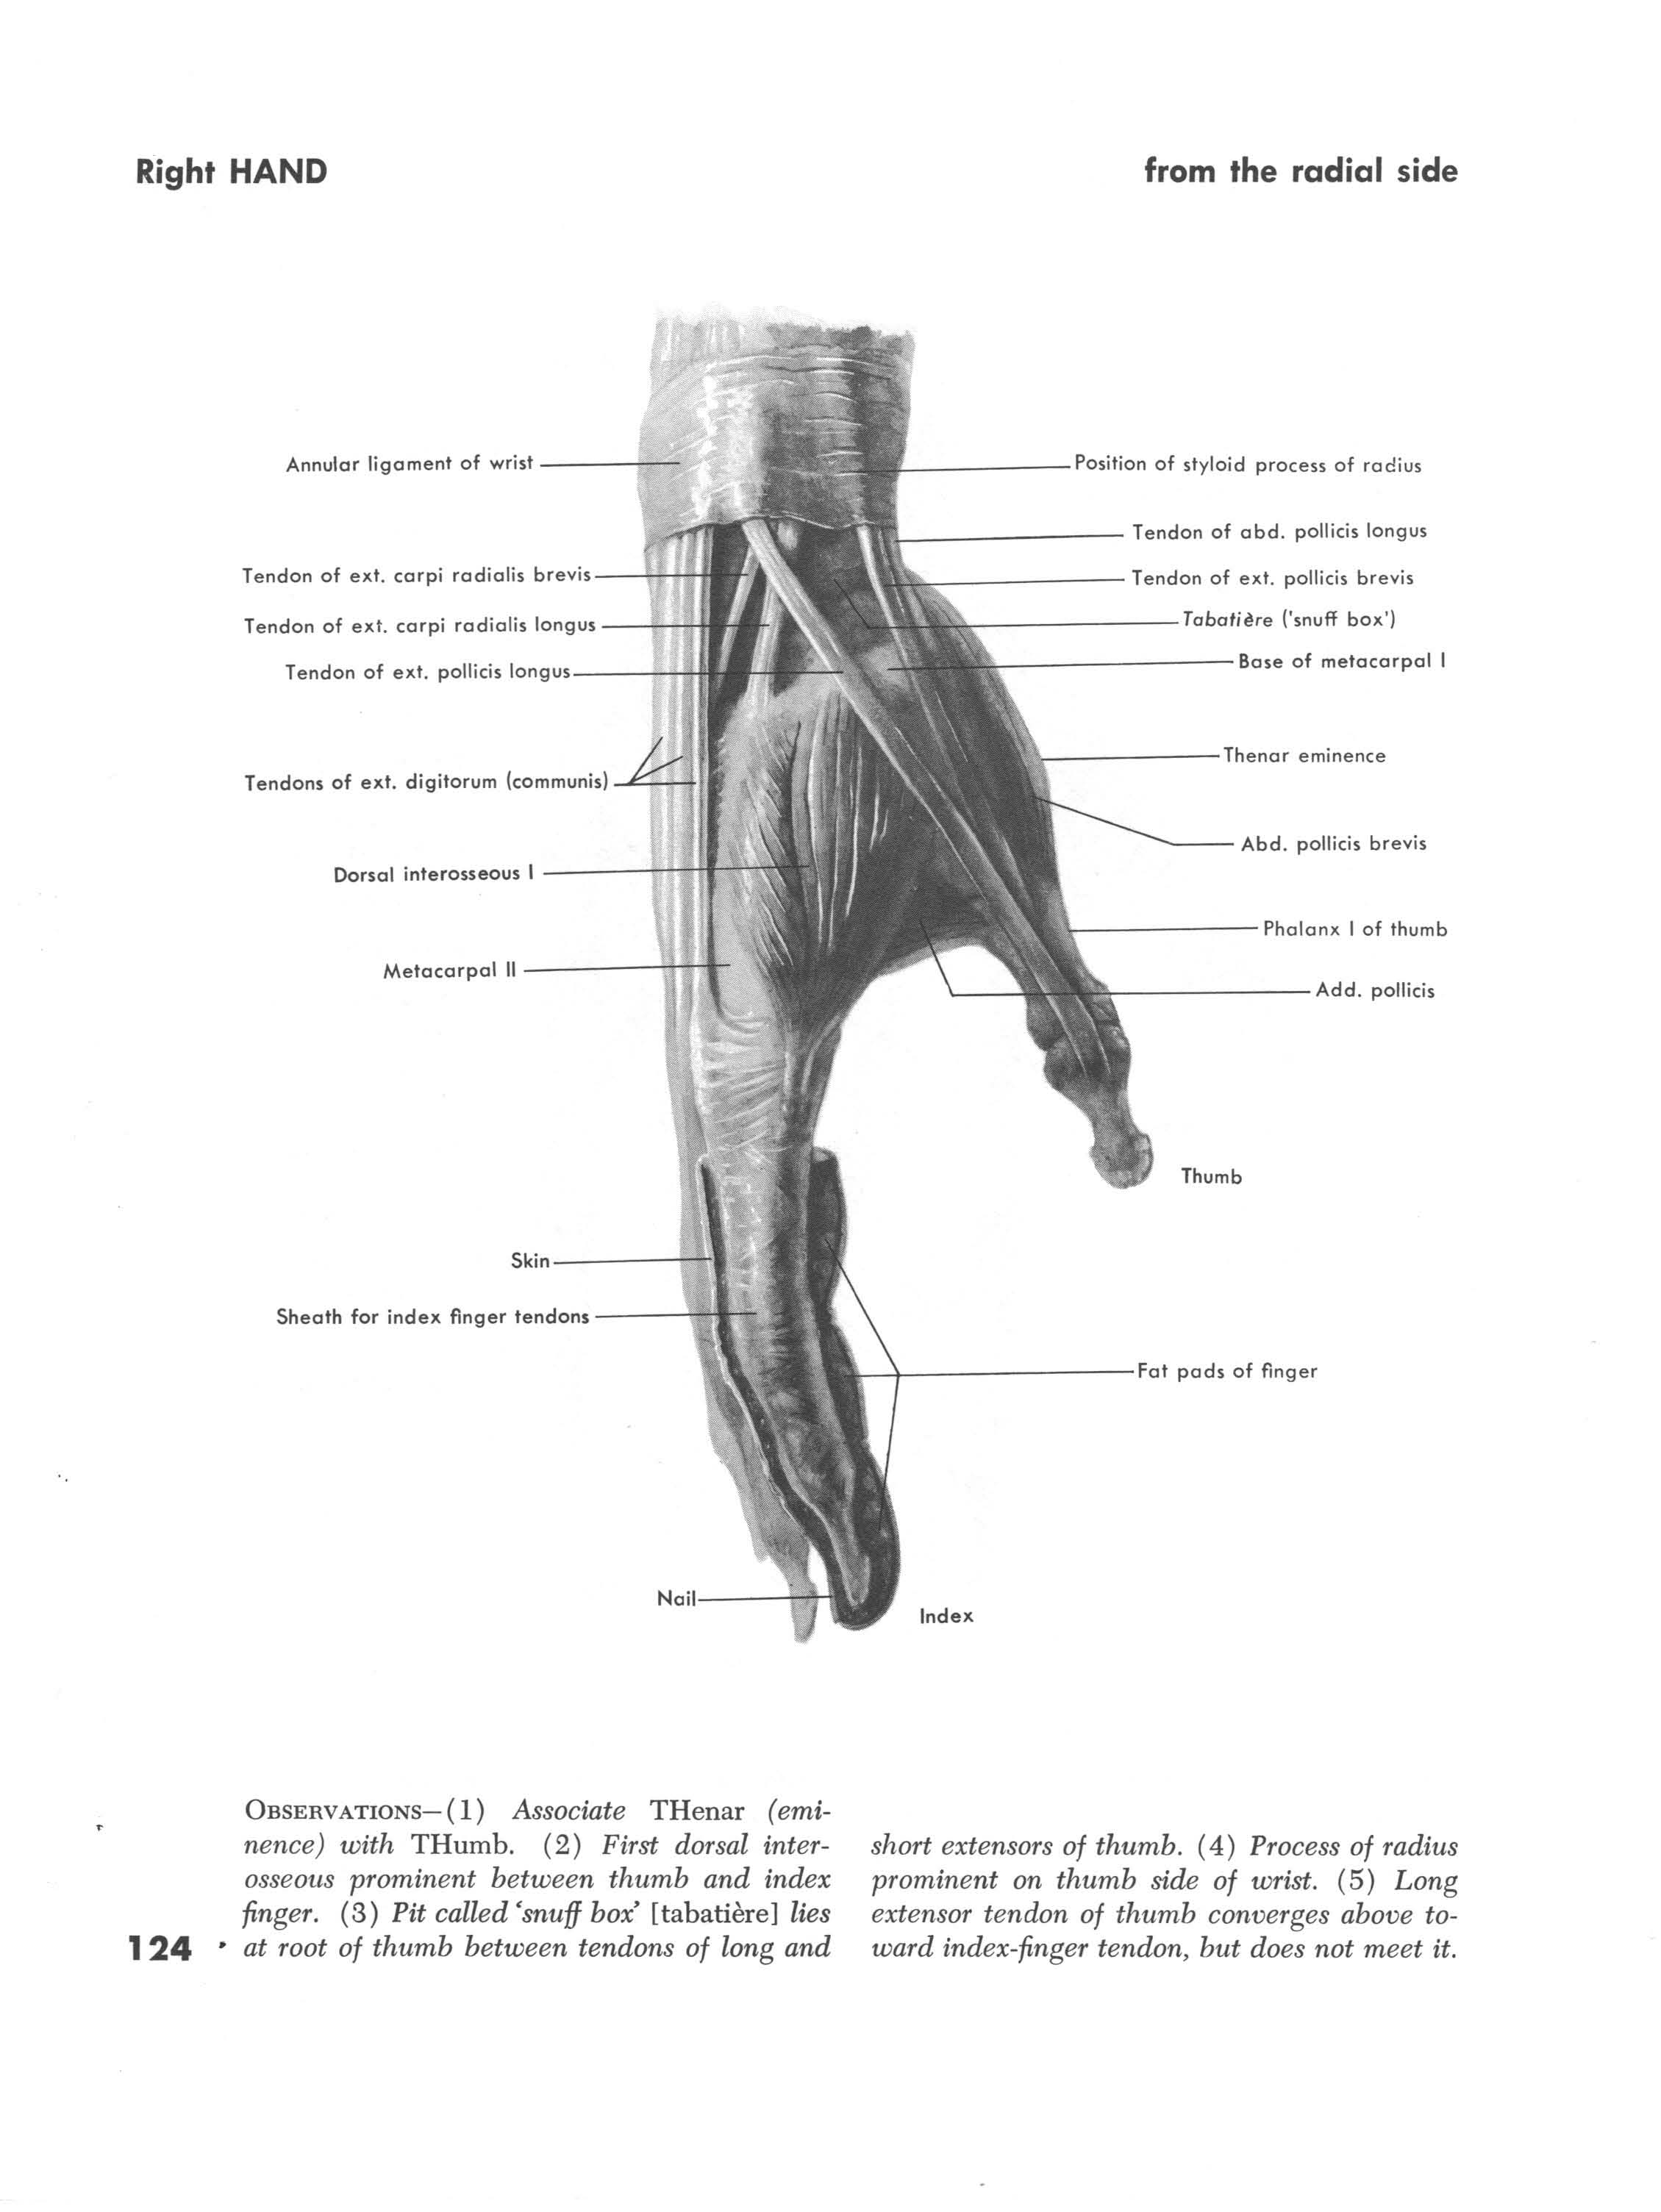 Muscles of the right hand side view